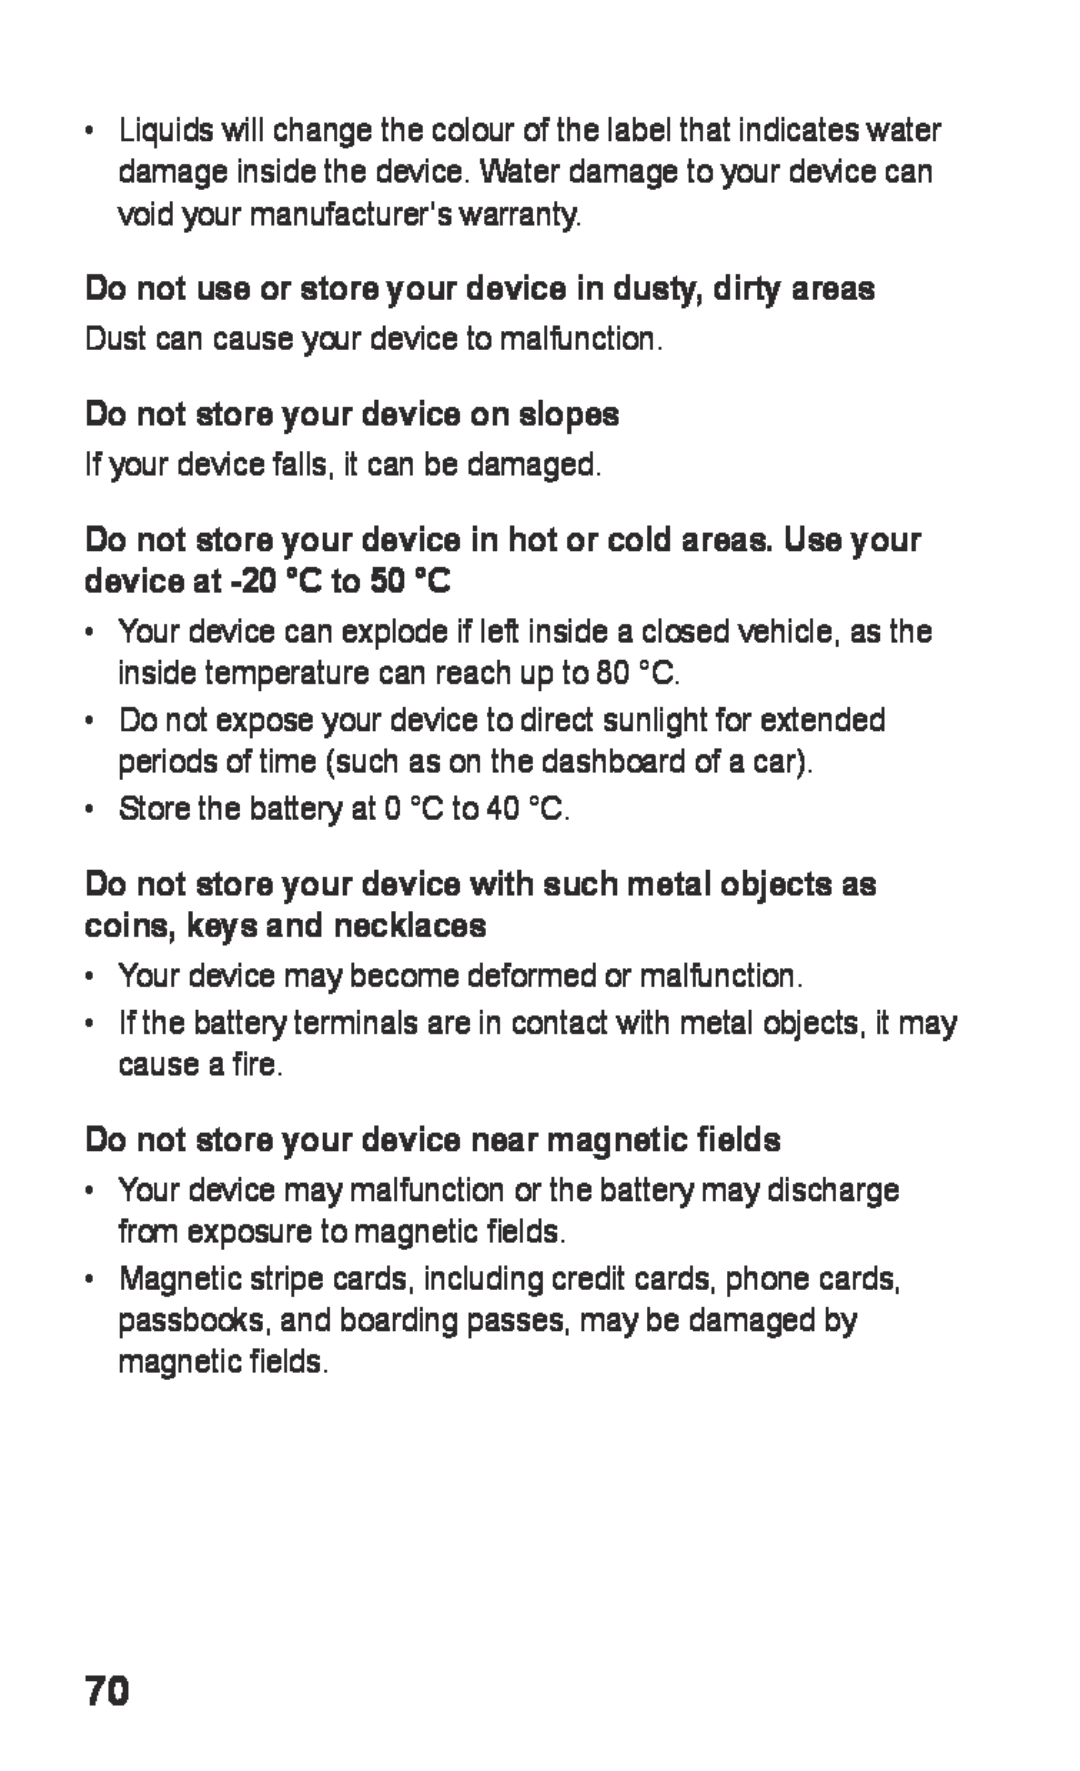 Samsung GT-S5260RWPDBT manual Do not use or store your device in dusty, dirty areas, Do not store your device on slopes 